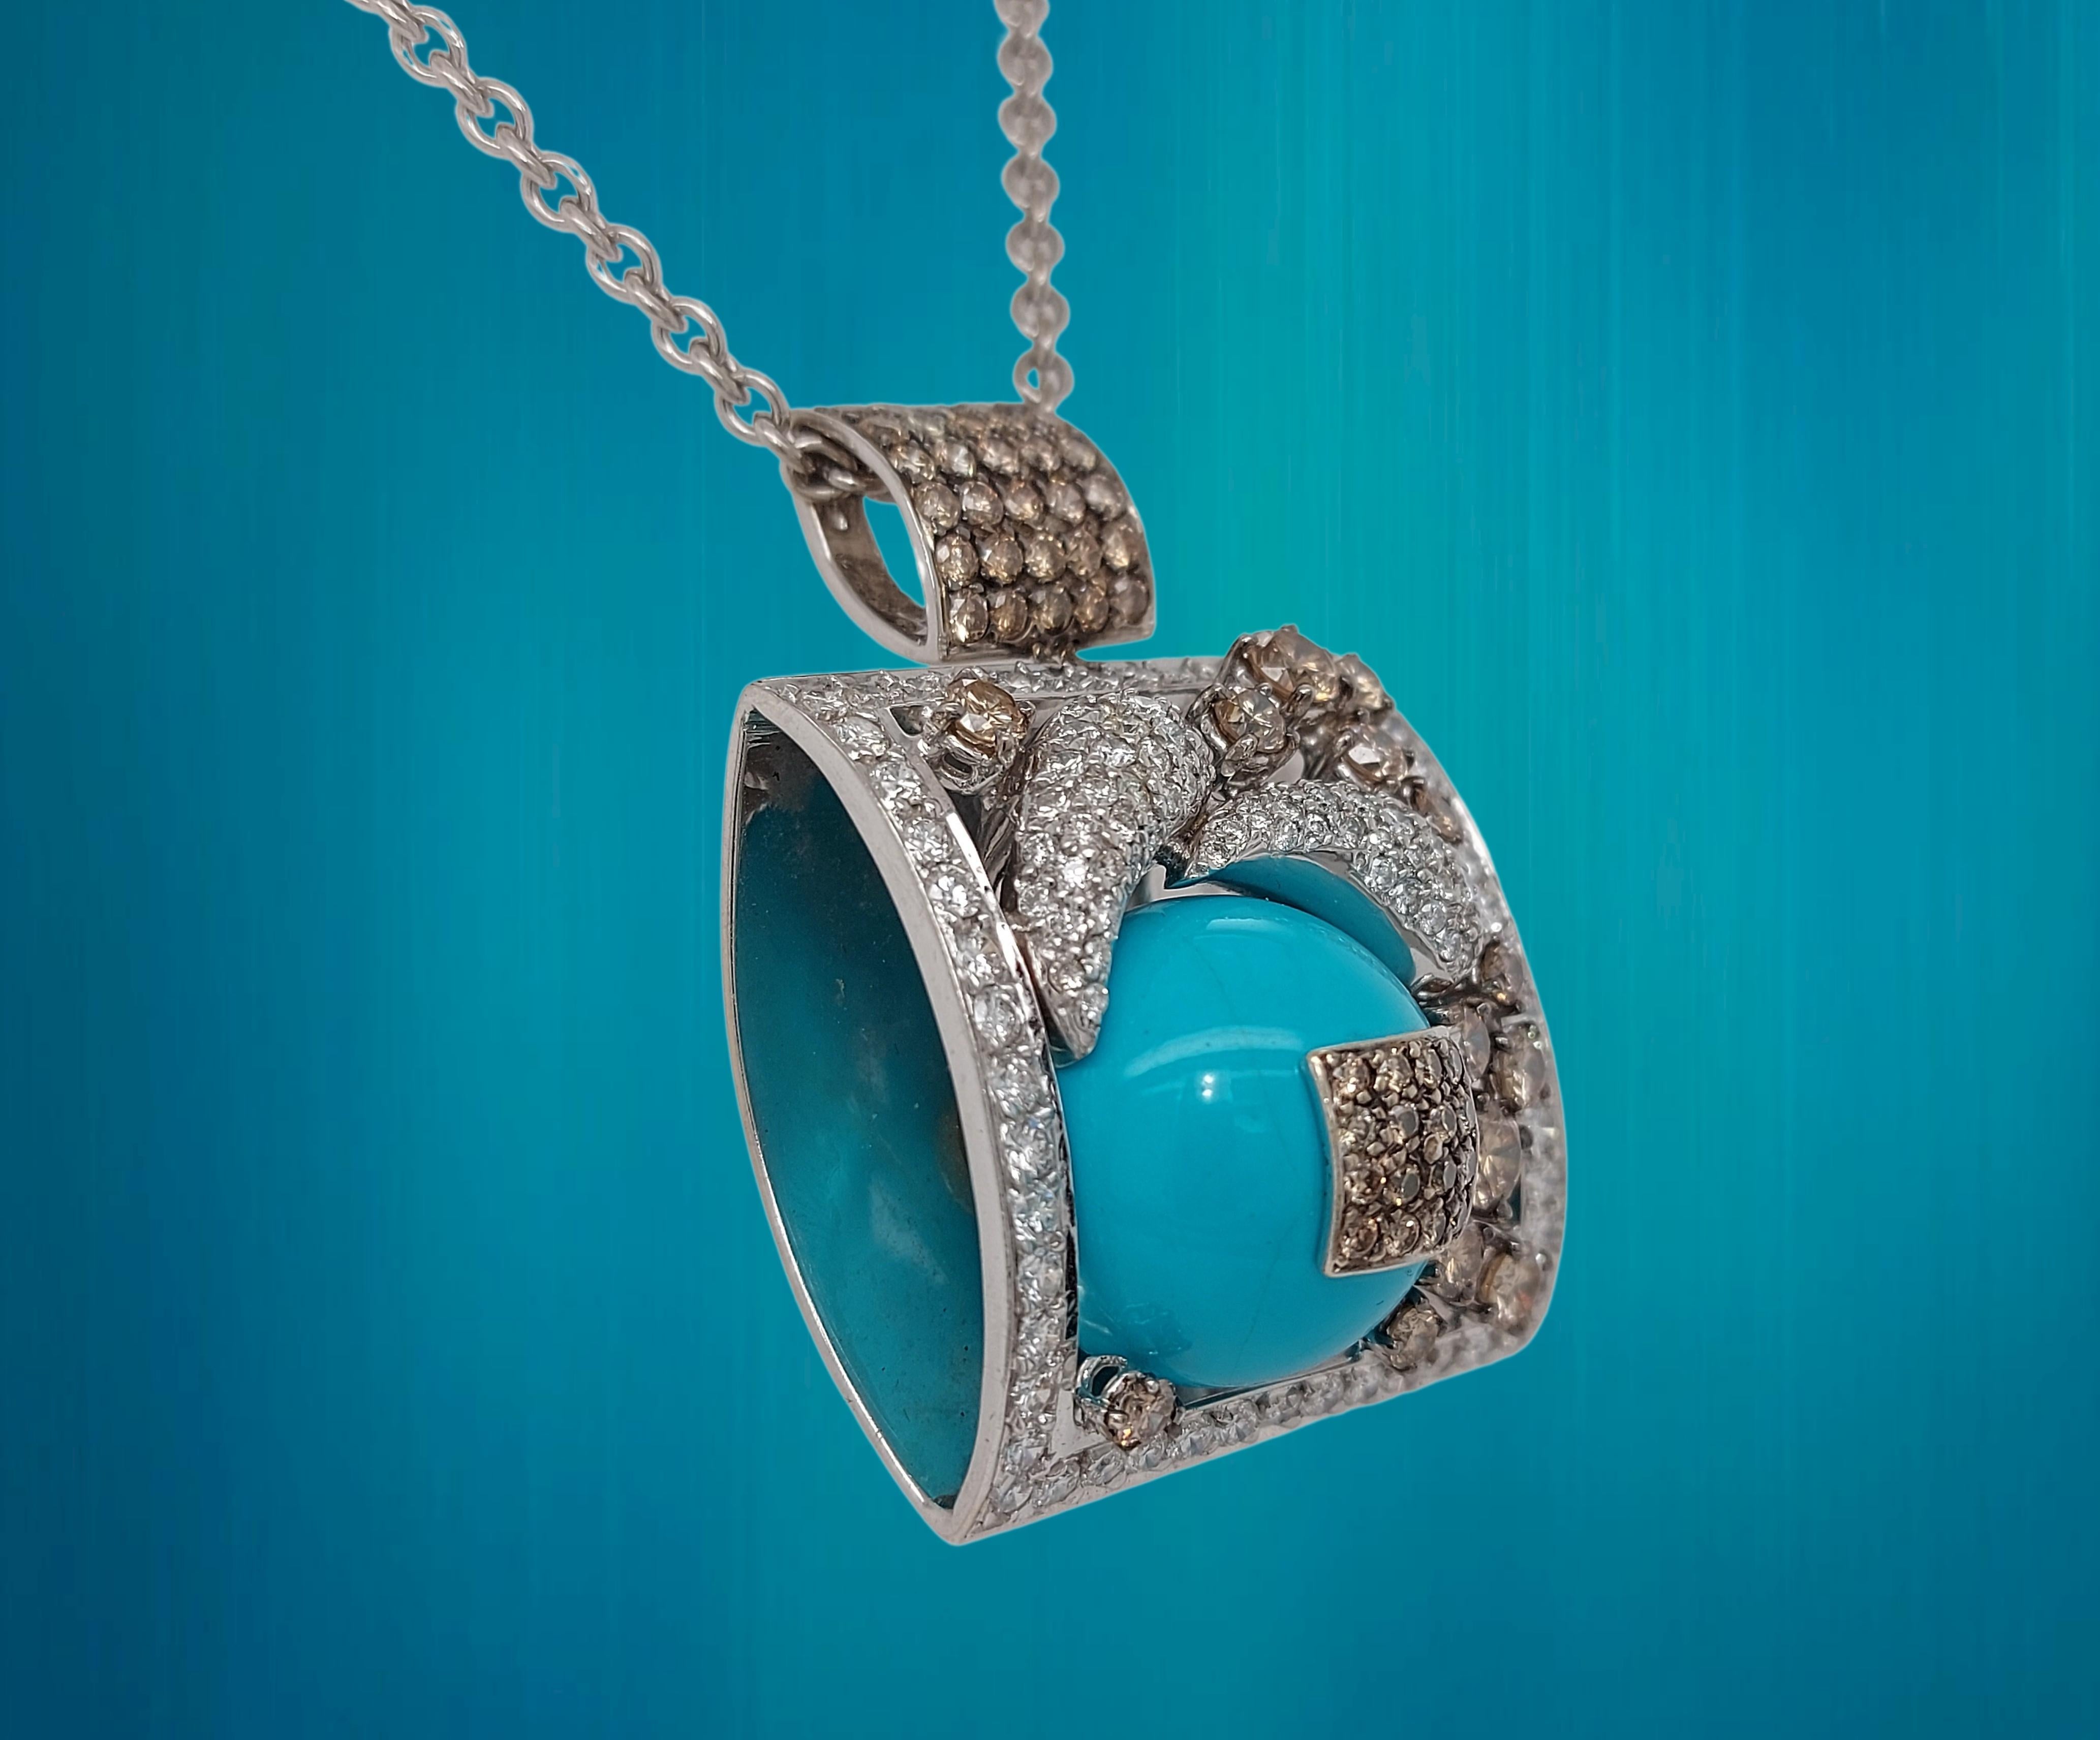 Brilliant Cut Stunning 18kt White Gold Pendant / Necklace with Turquoise and Diamonds